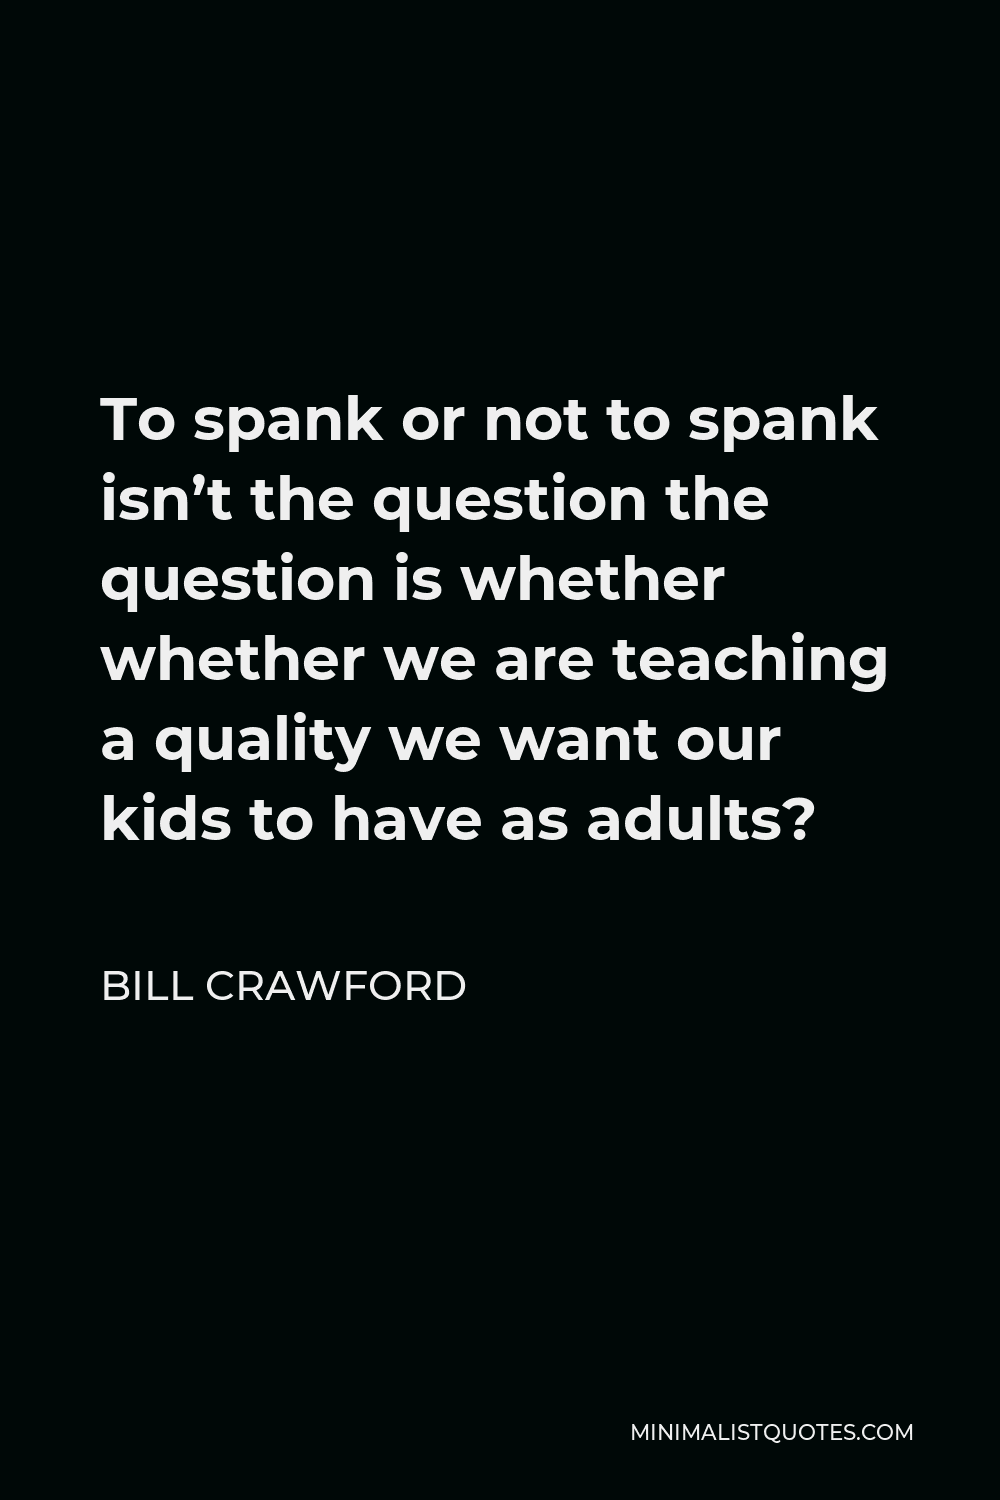 Bill Crawford Quote - To spank or not to spank isn’t the question the question is whether whether we are teaching a quality we want our kids to have as adults?